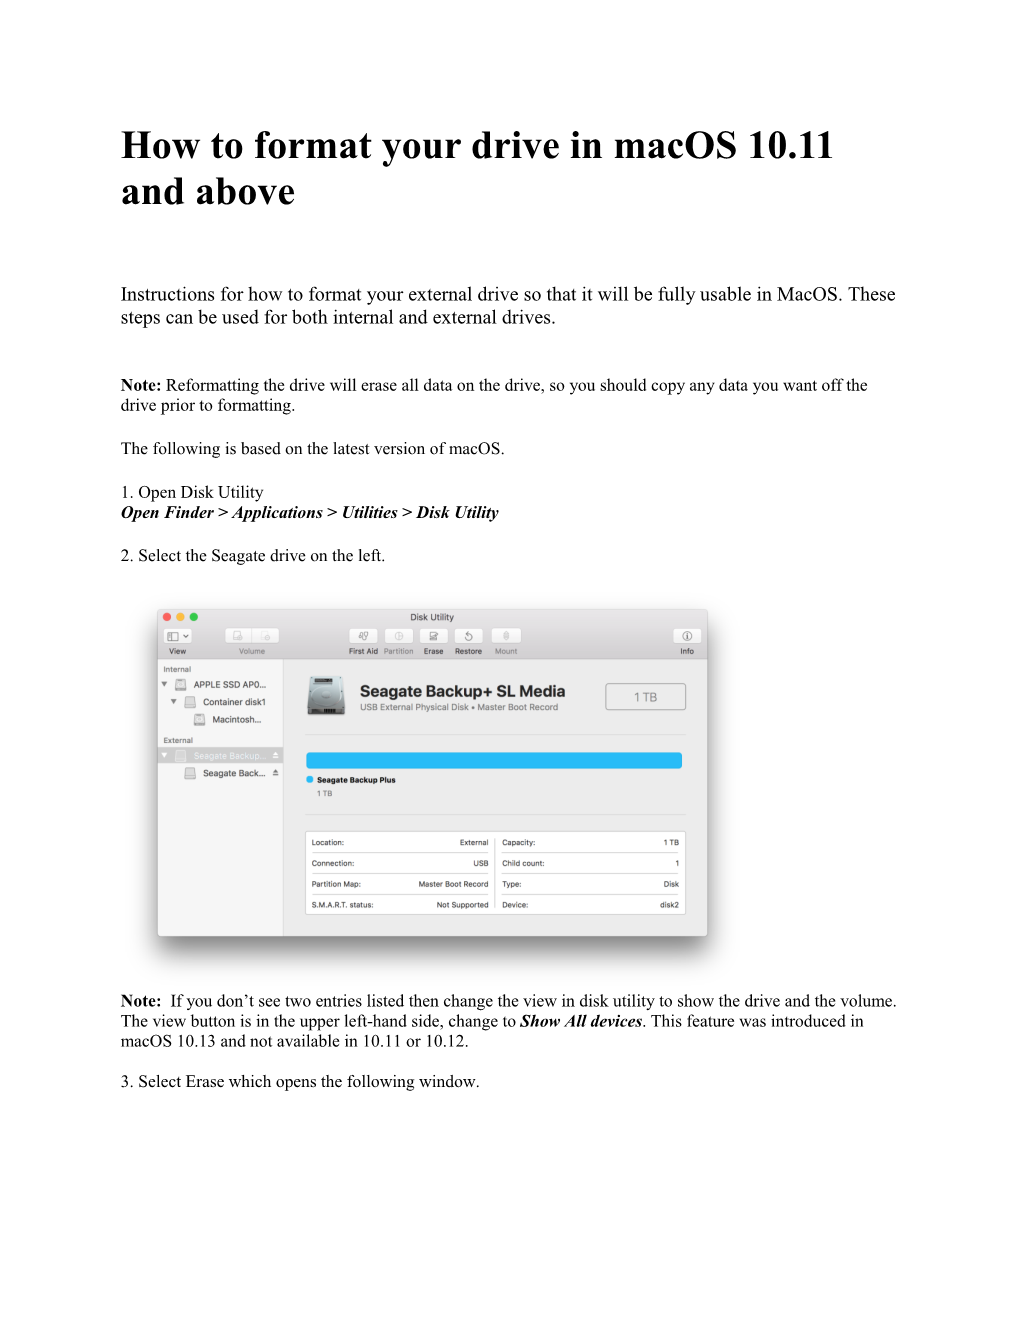 How to Format Your Drive in Macos 10.11 and Above